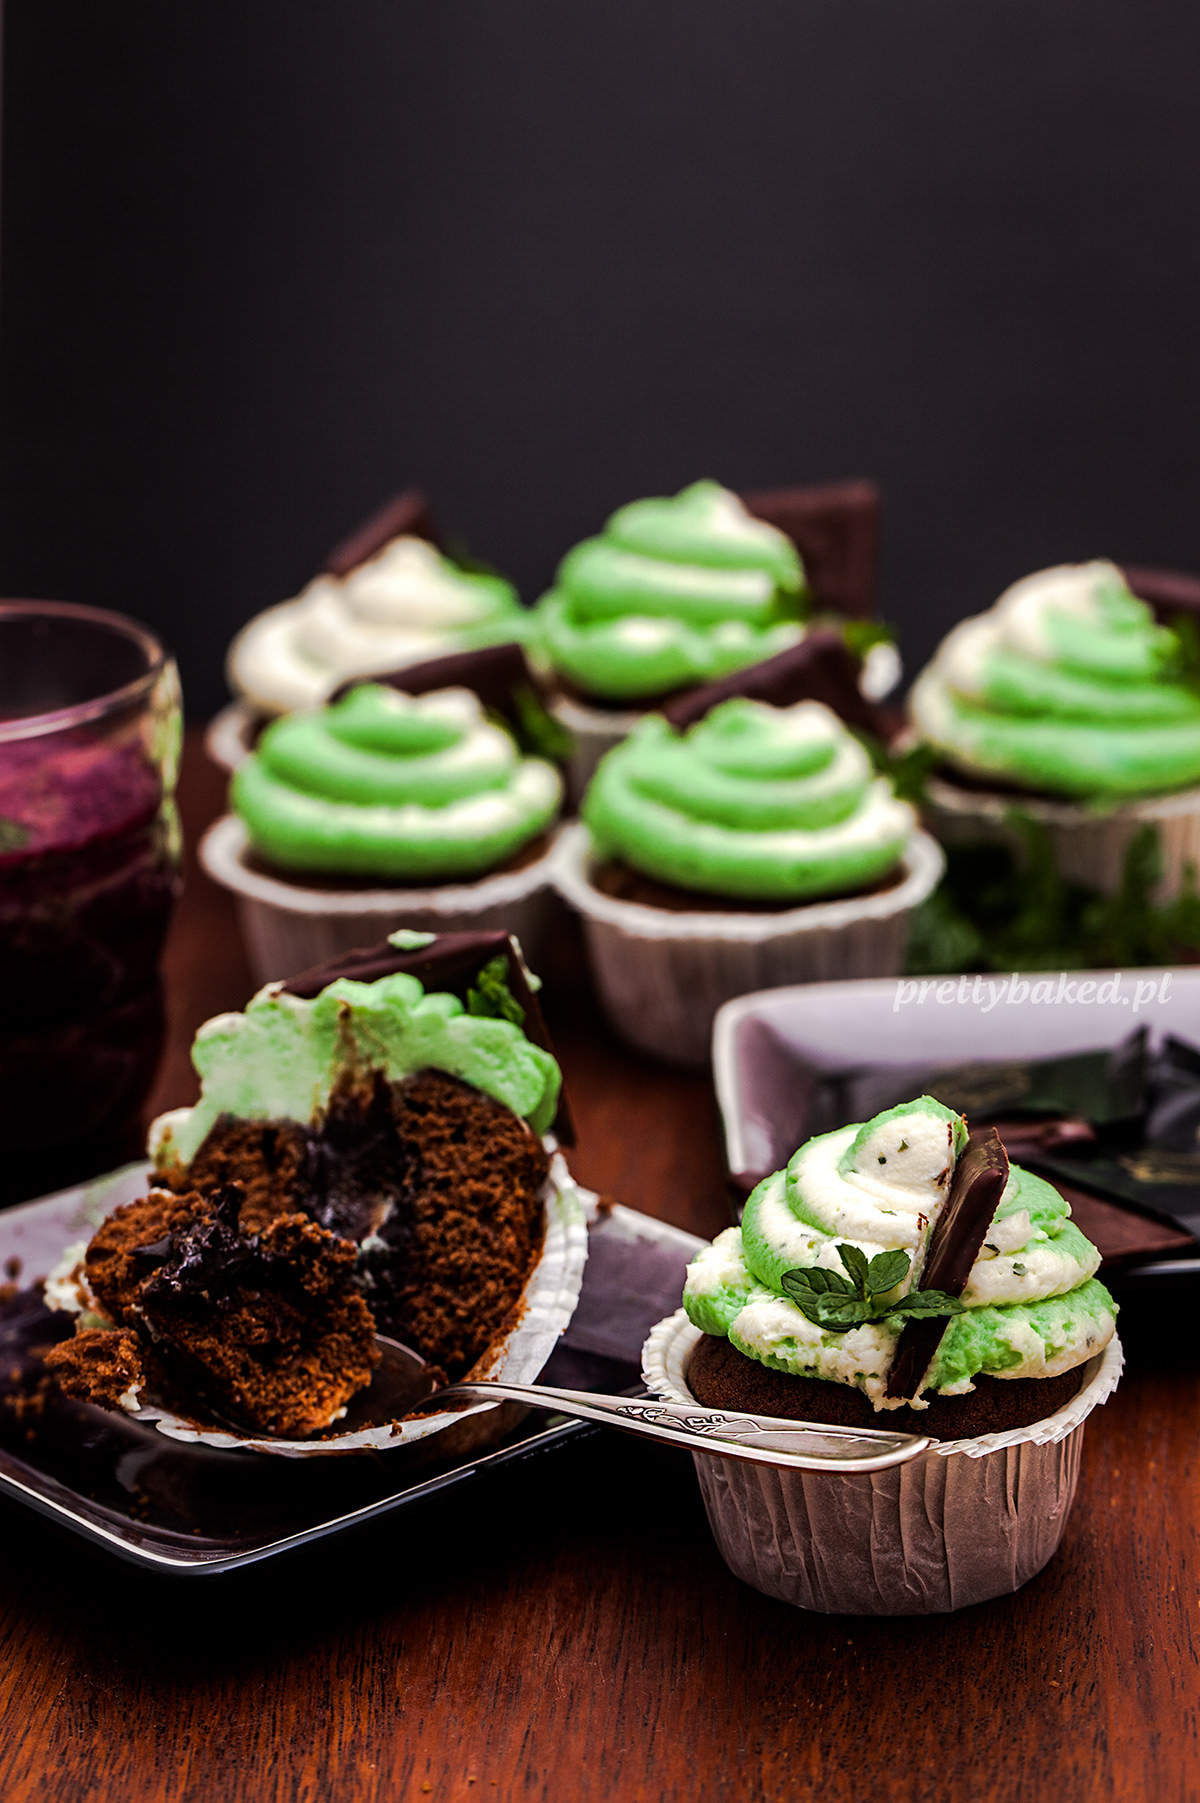 Canon 5D Food  styling  sweet dessert cream cupcake mint chocolate Eating  baking yummy cooking tasty